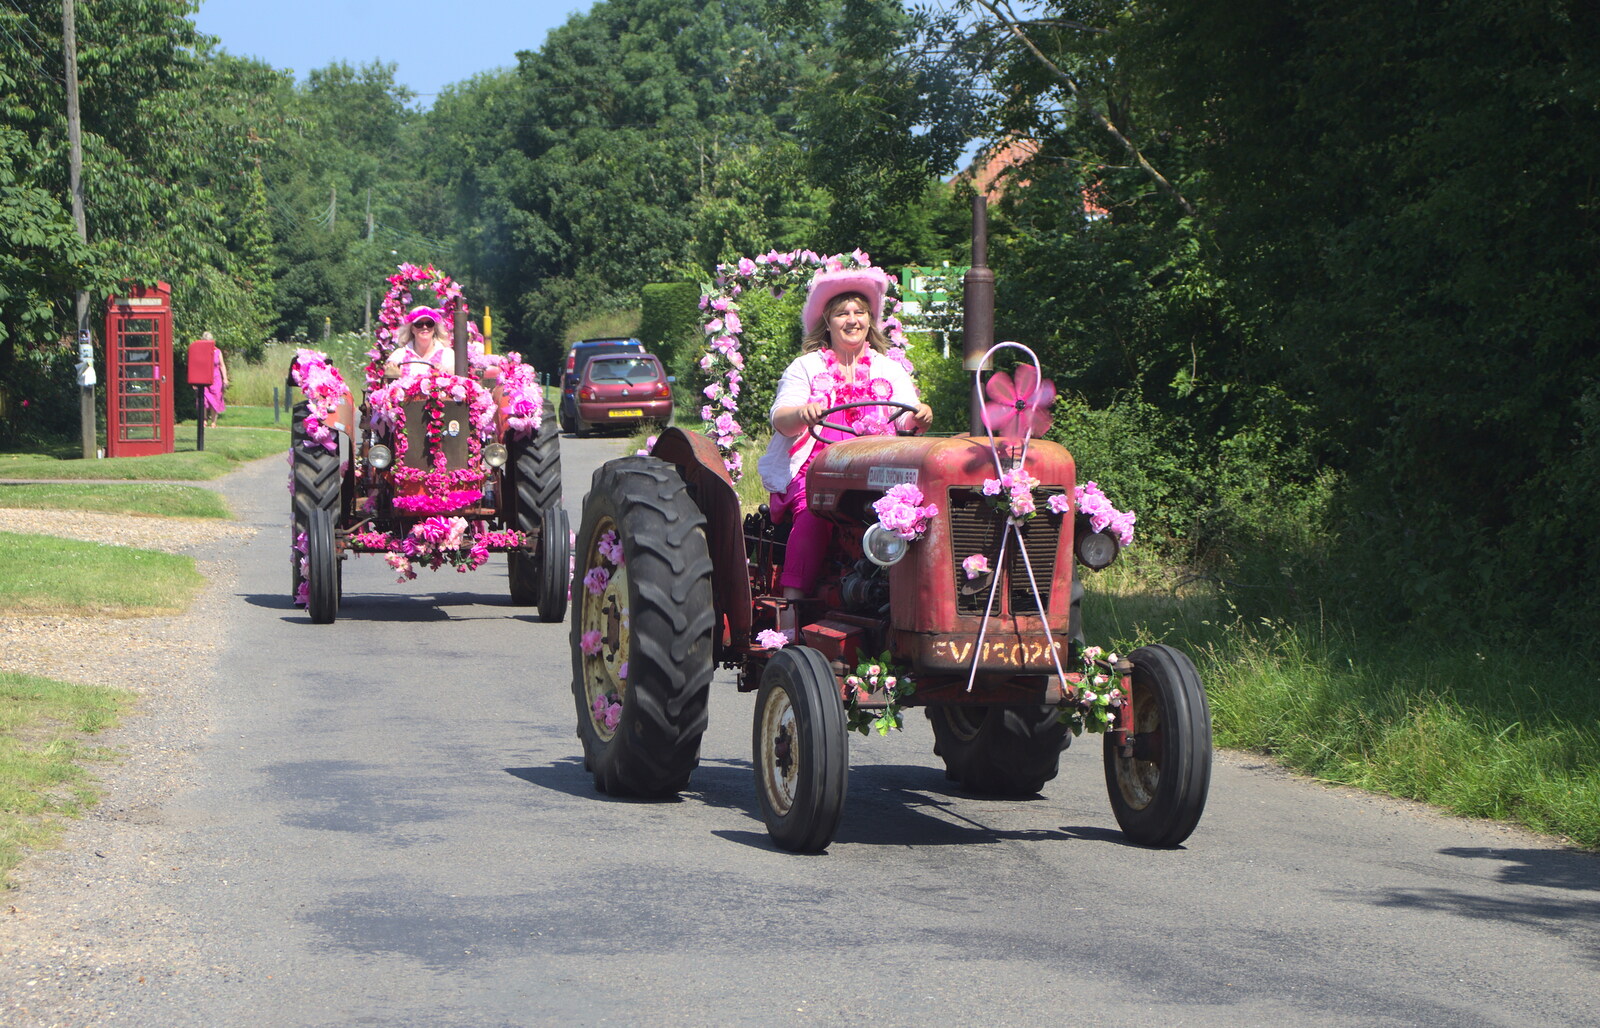 Garland-festooned tractors from The "Pink Ladies" Tractor Run and Barbeque, Thorpe Abbots, Norfolk - 7th July 2013